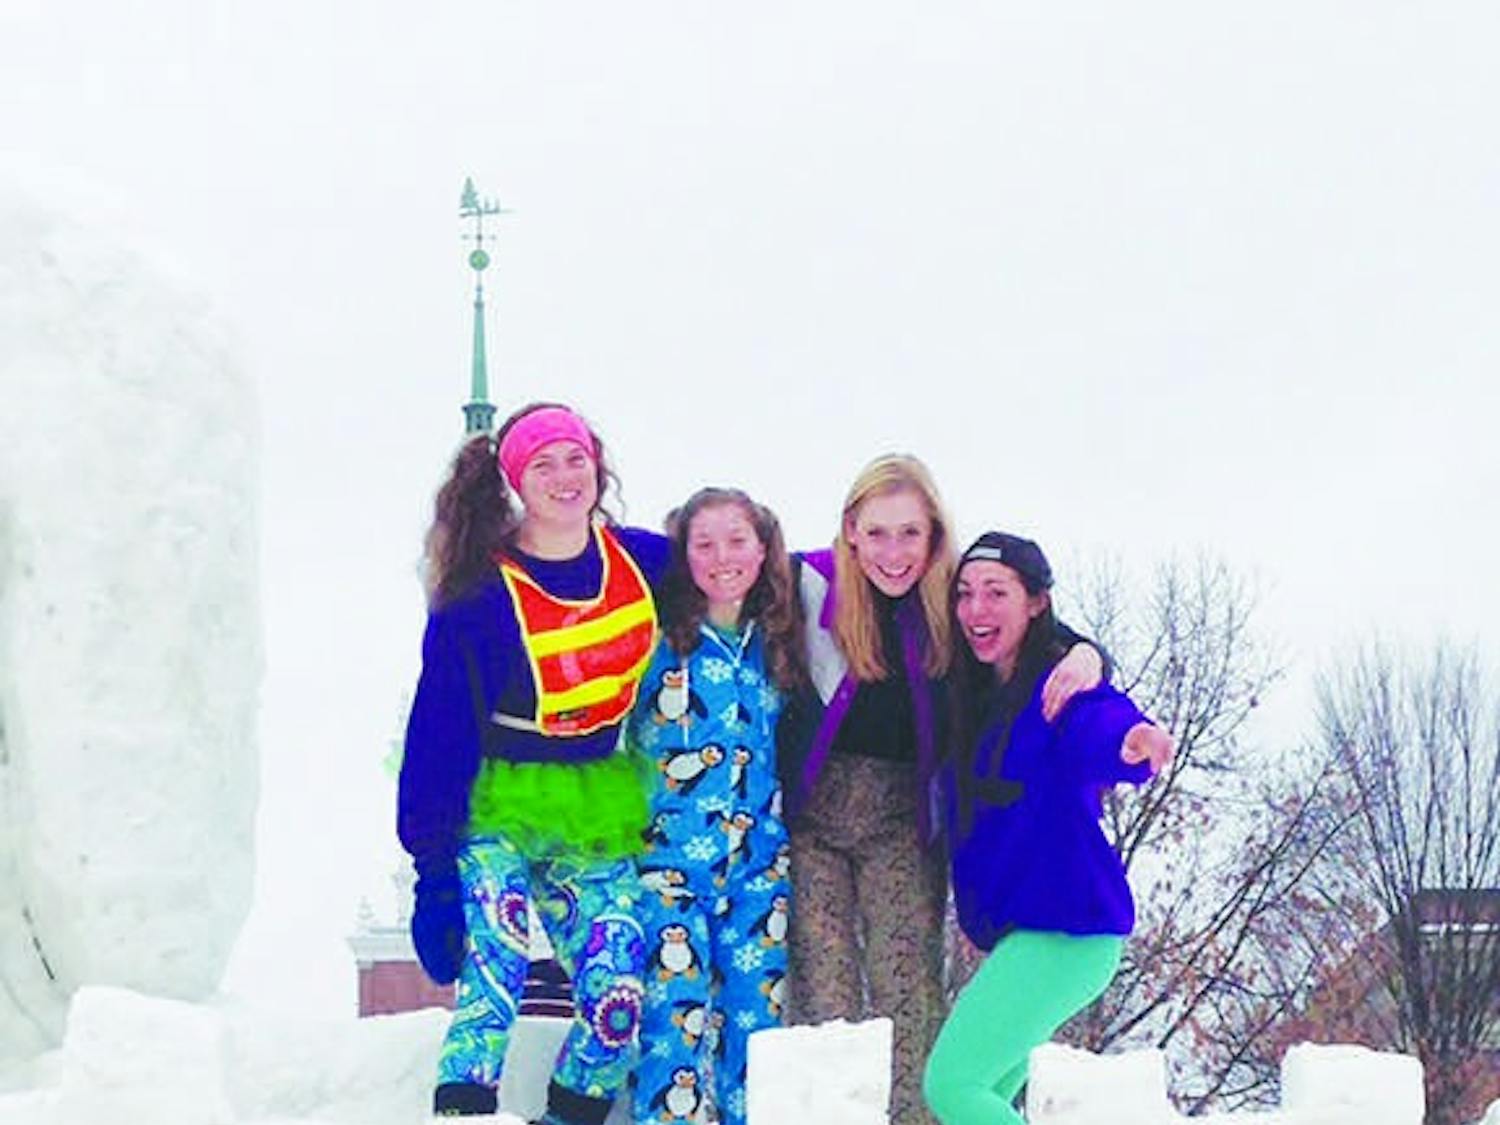 Emma Sklarin '18 (right) stands on a Winter Carnival snow sculpture with friends.&nbsp;